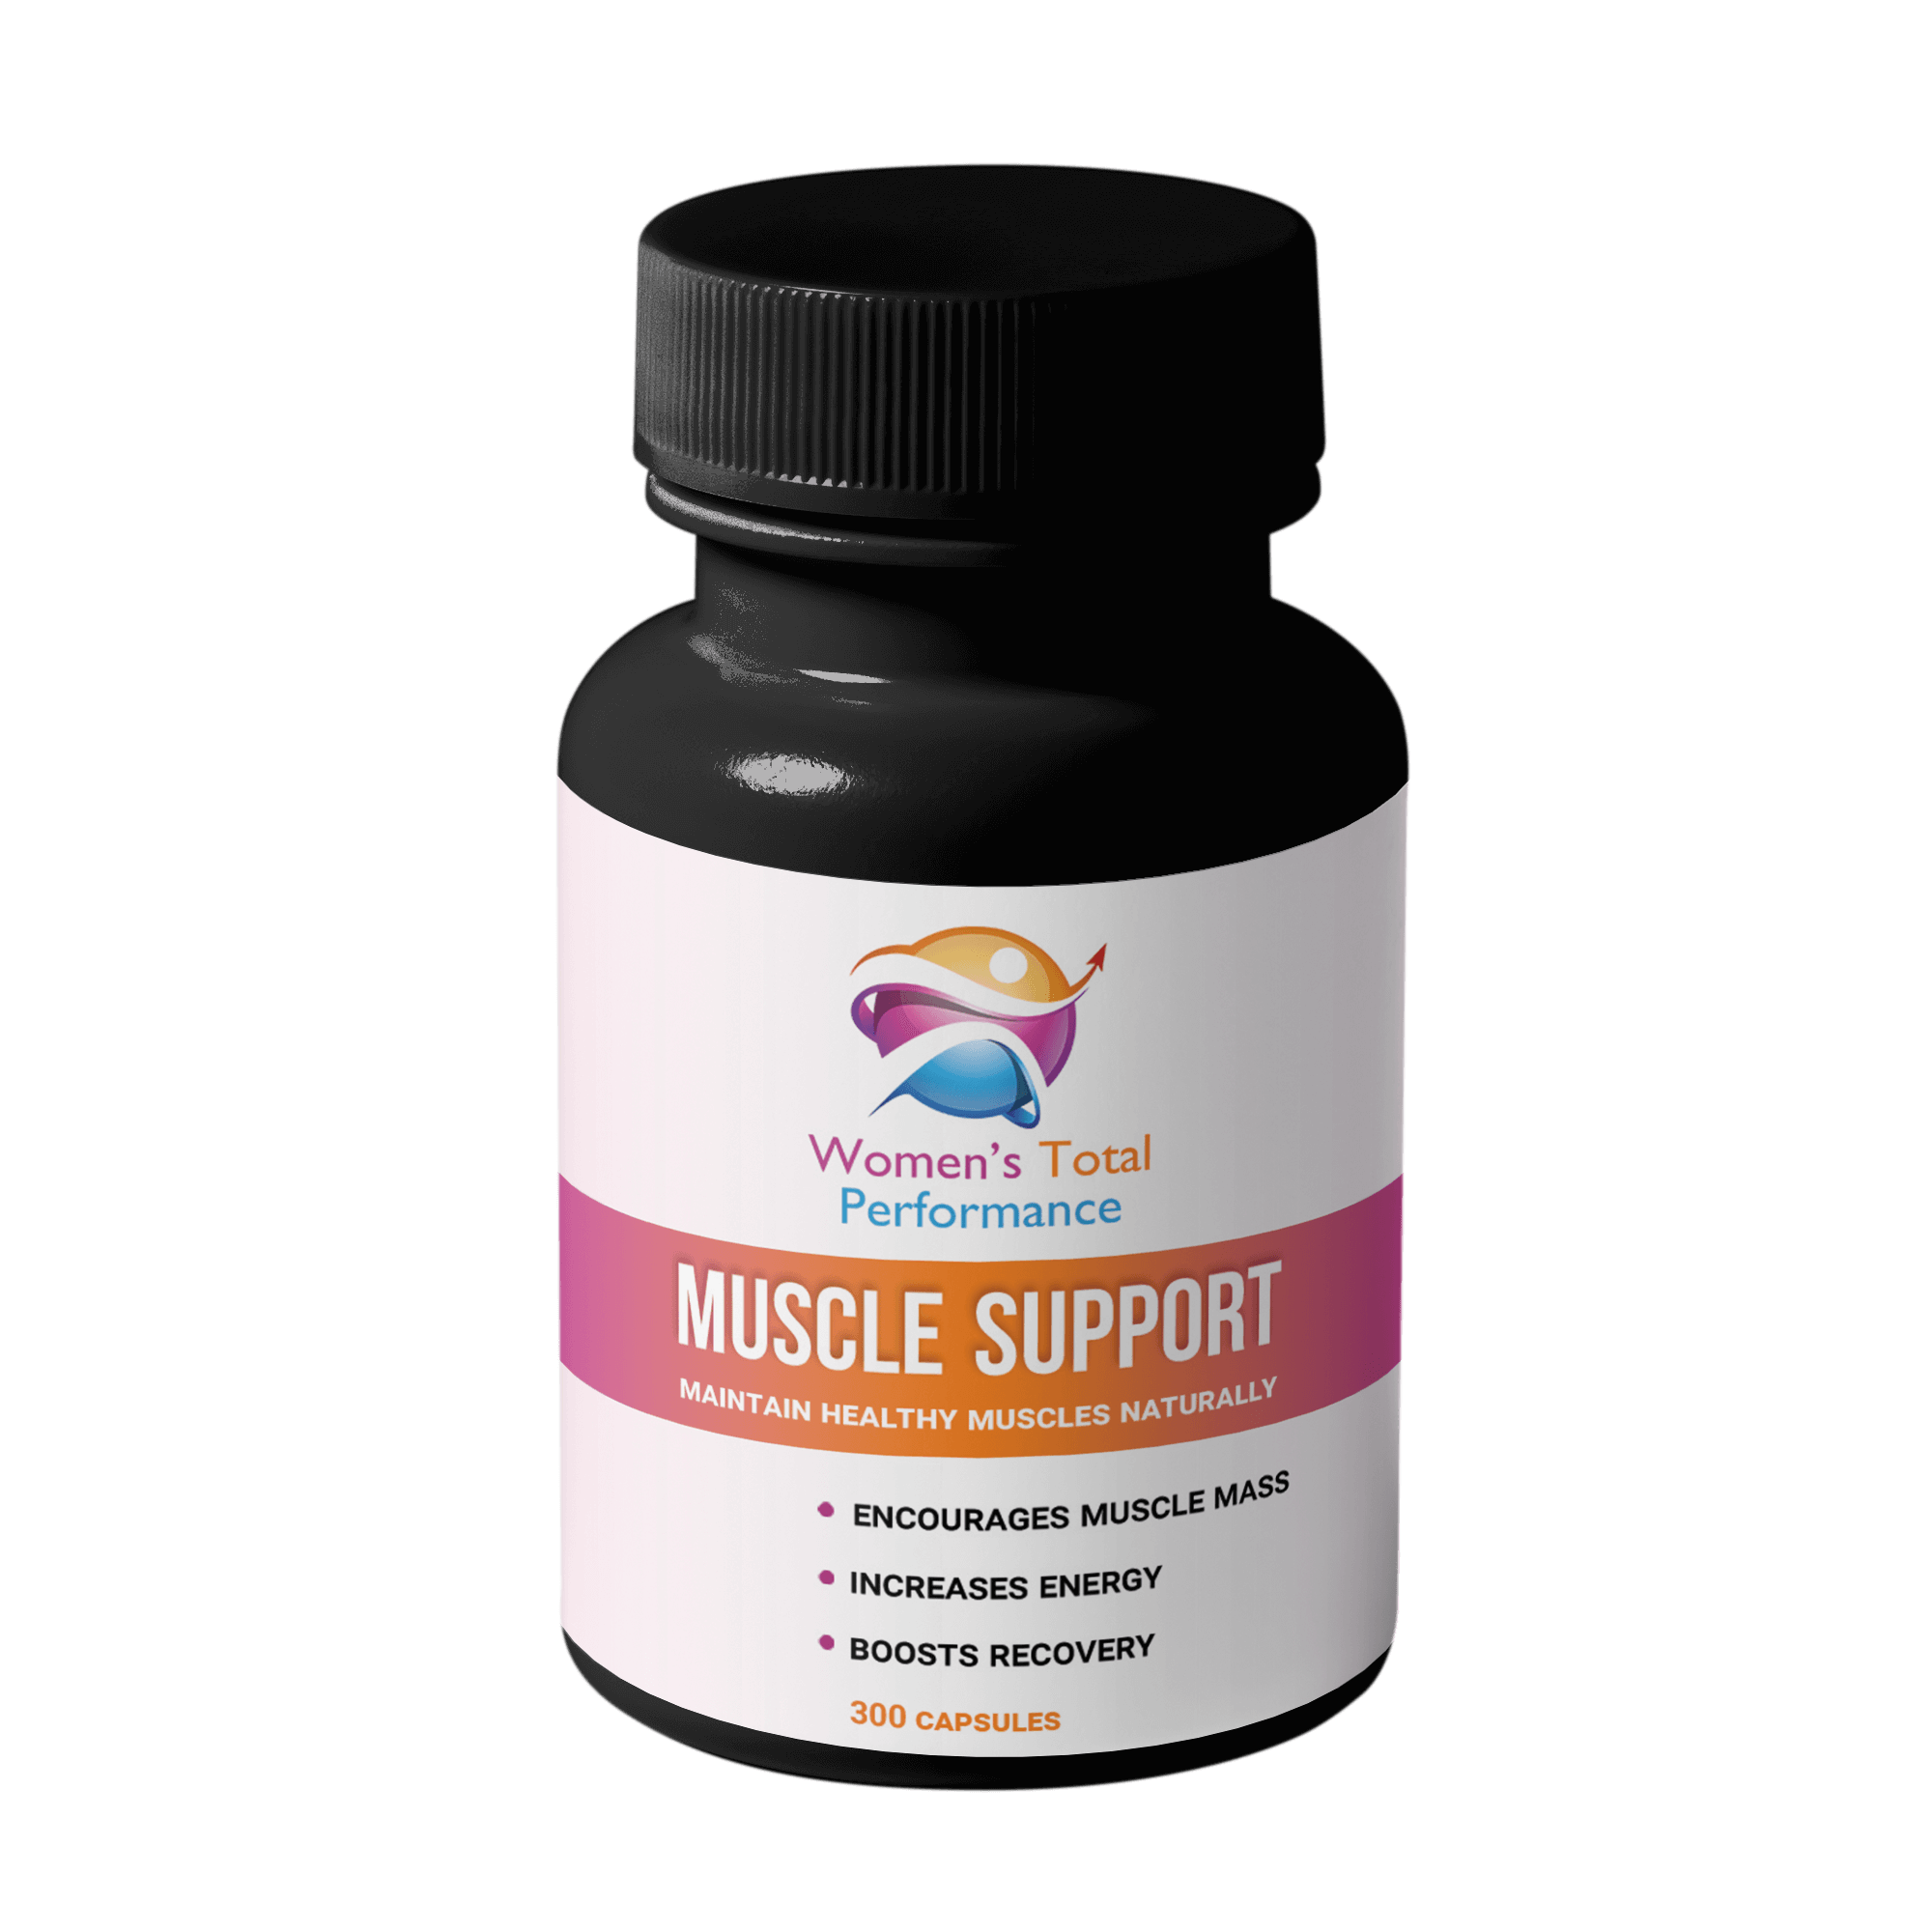 Muscle Support - Women's Total Performance